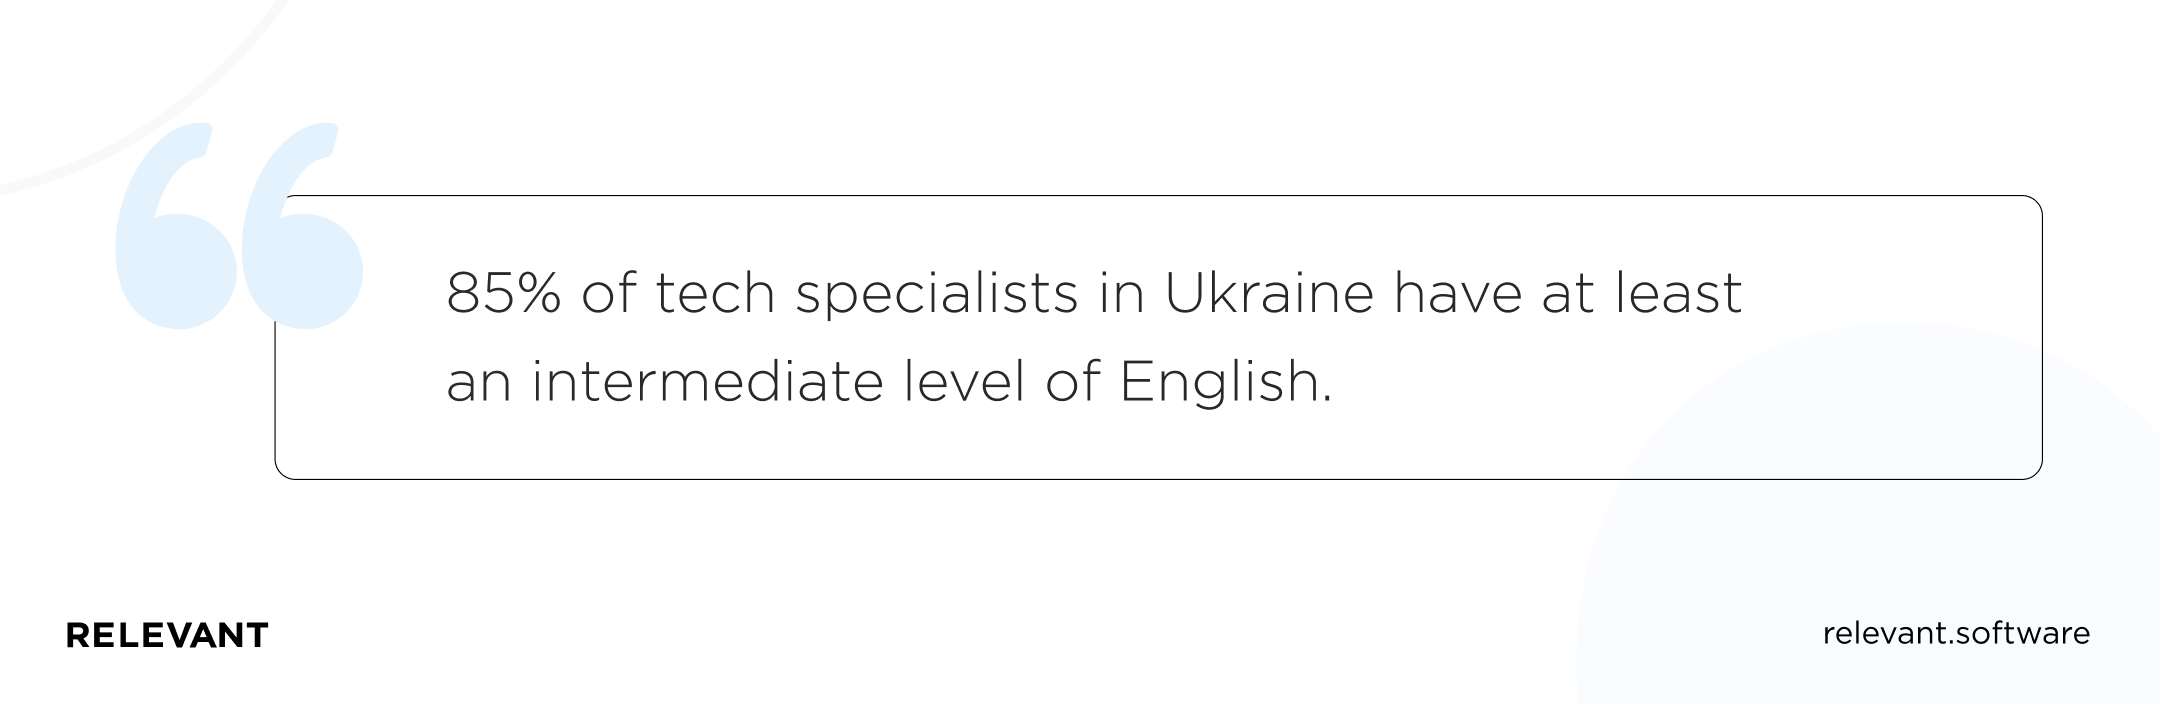 85% of tech specialists in Ukraine have at least an intermediate level of English.